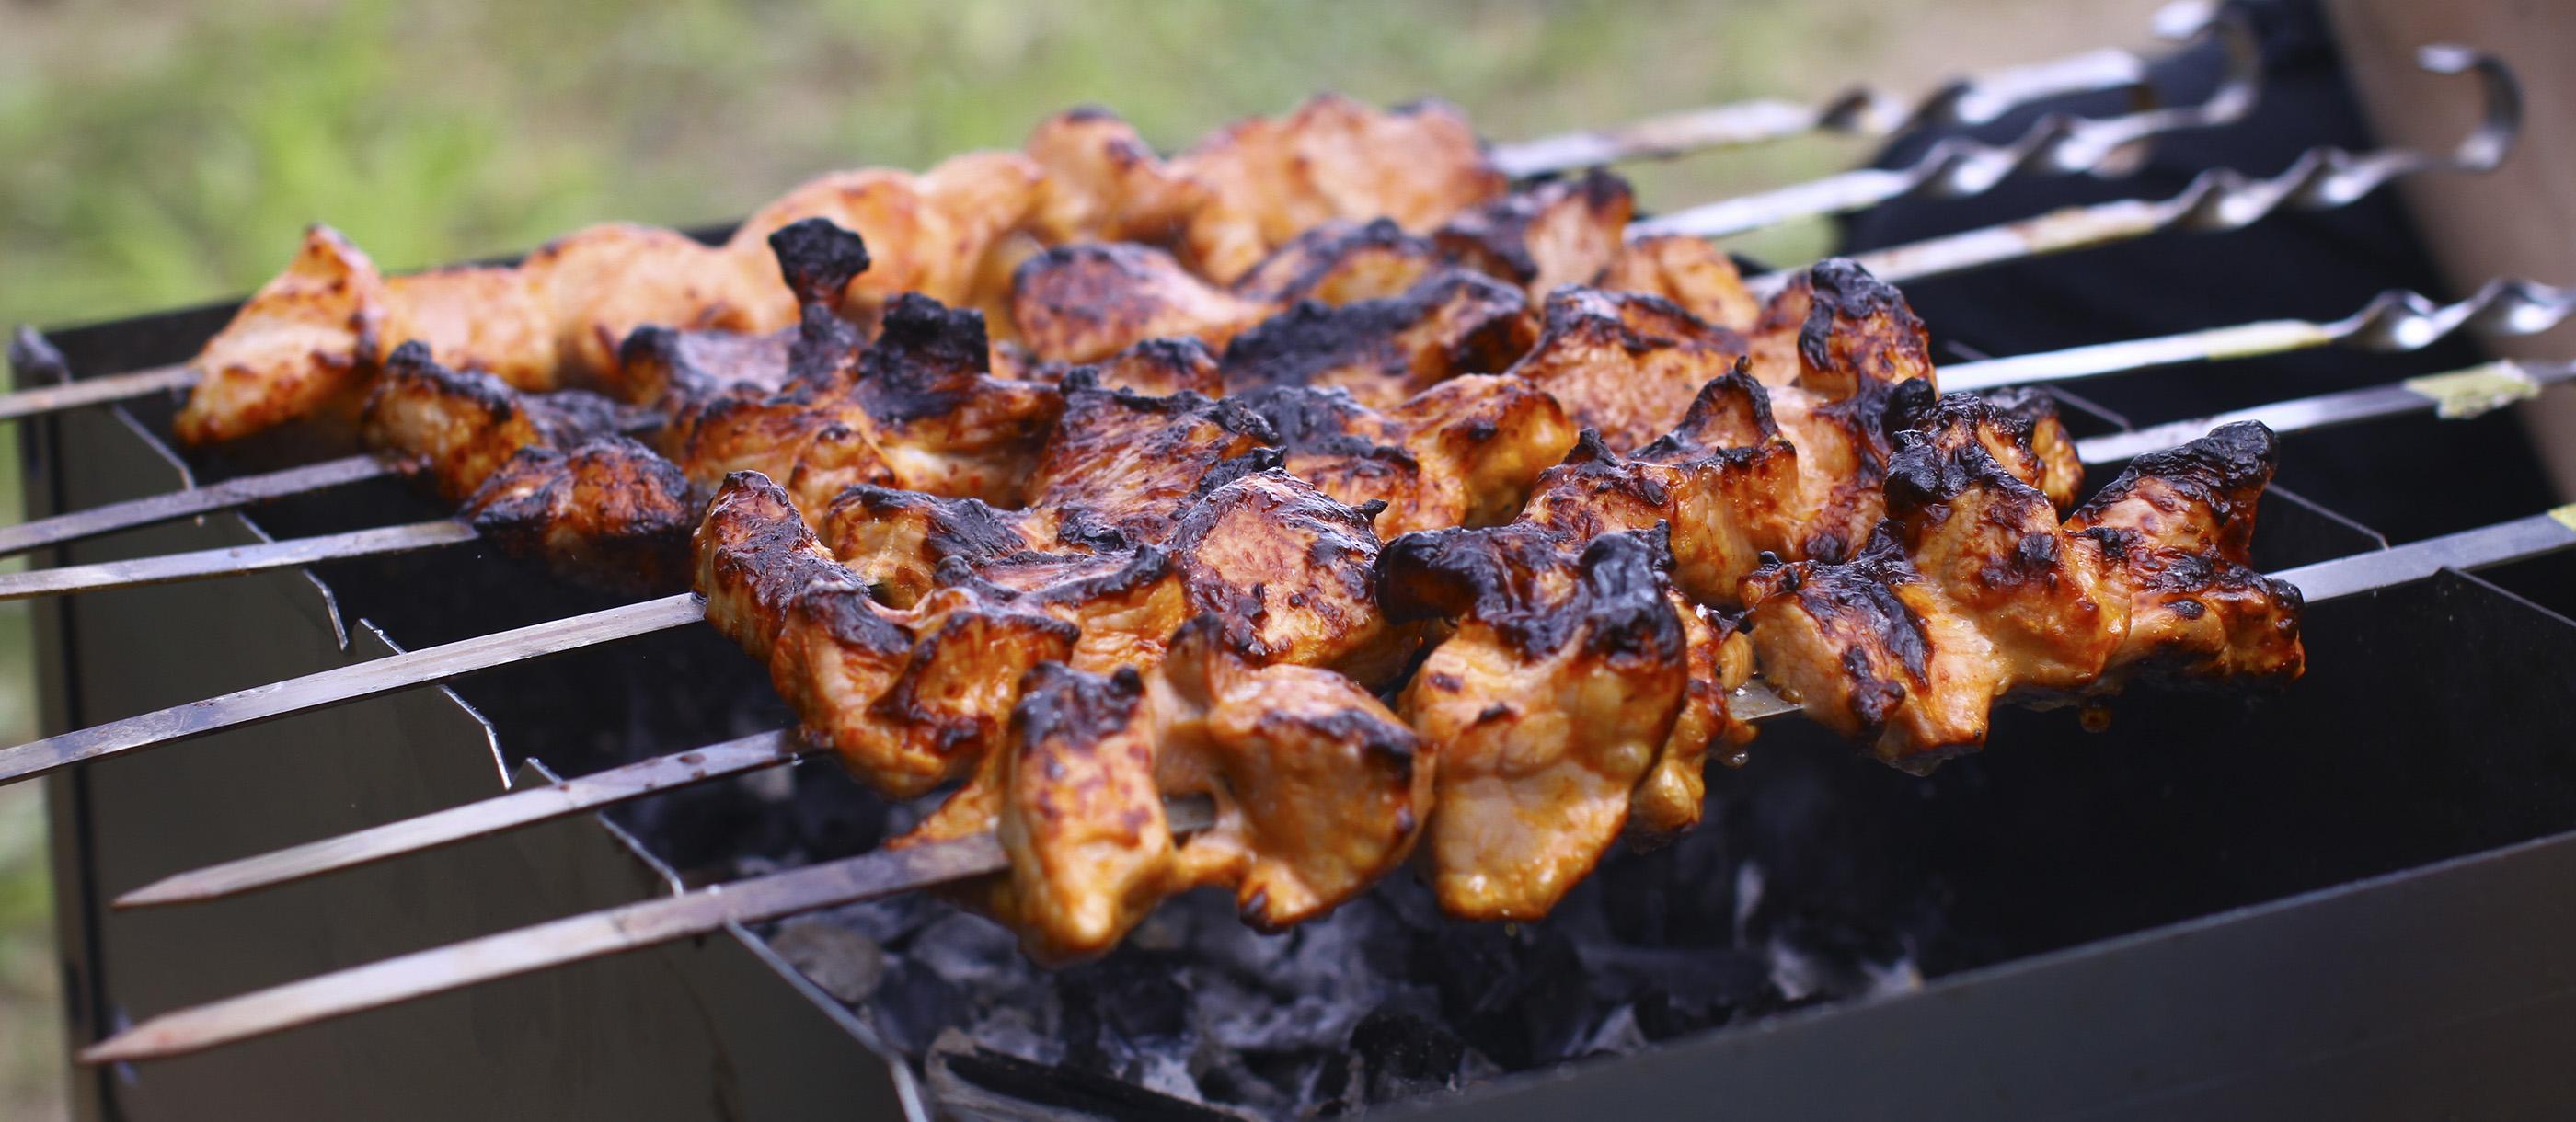 Grilling marinated shashlik preparing on a barbecue grill over charcoal.  Shashlik is a form of Shish kebab popular in Eastern Europe. Shashlyk (meaning  skewered meat) was originally made of lamb. Stock Photo